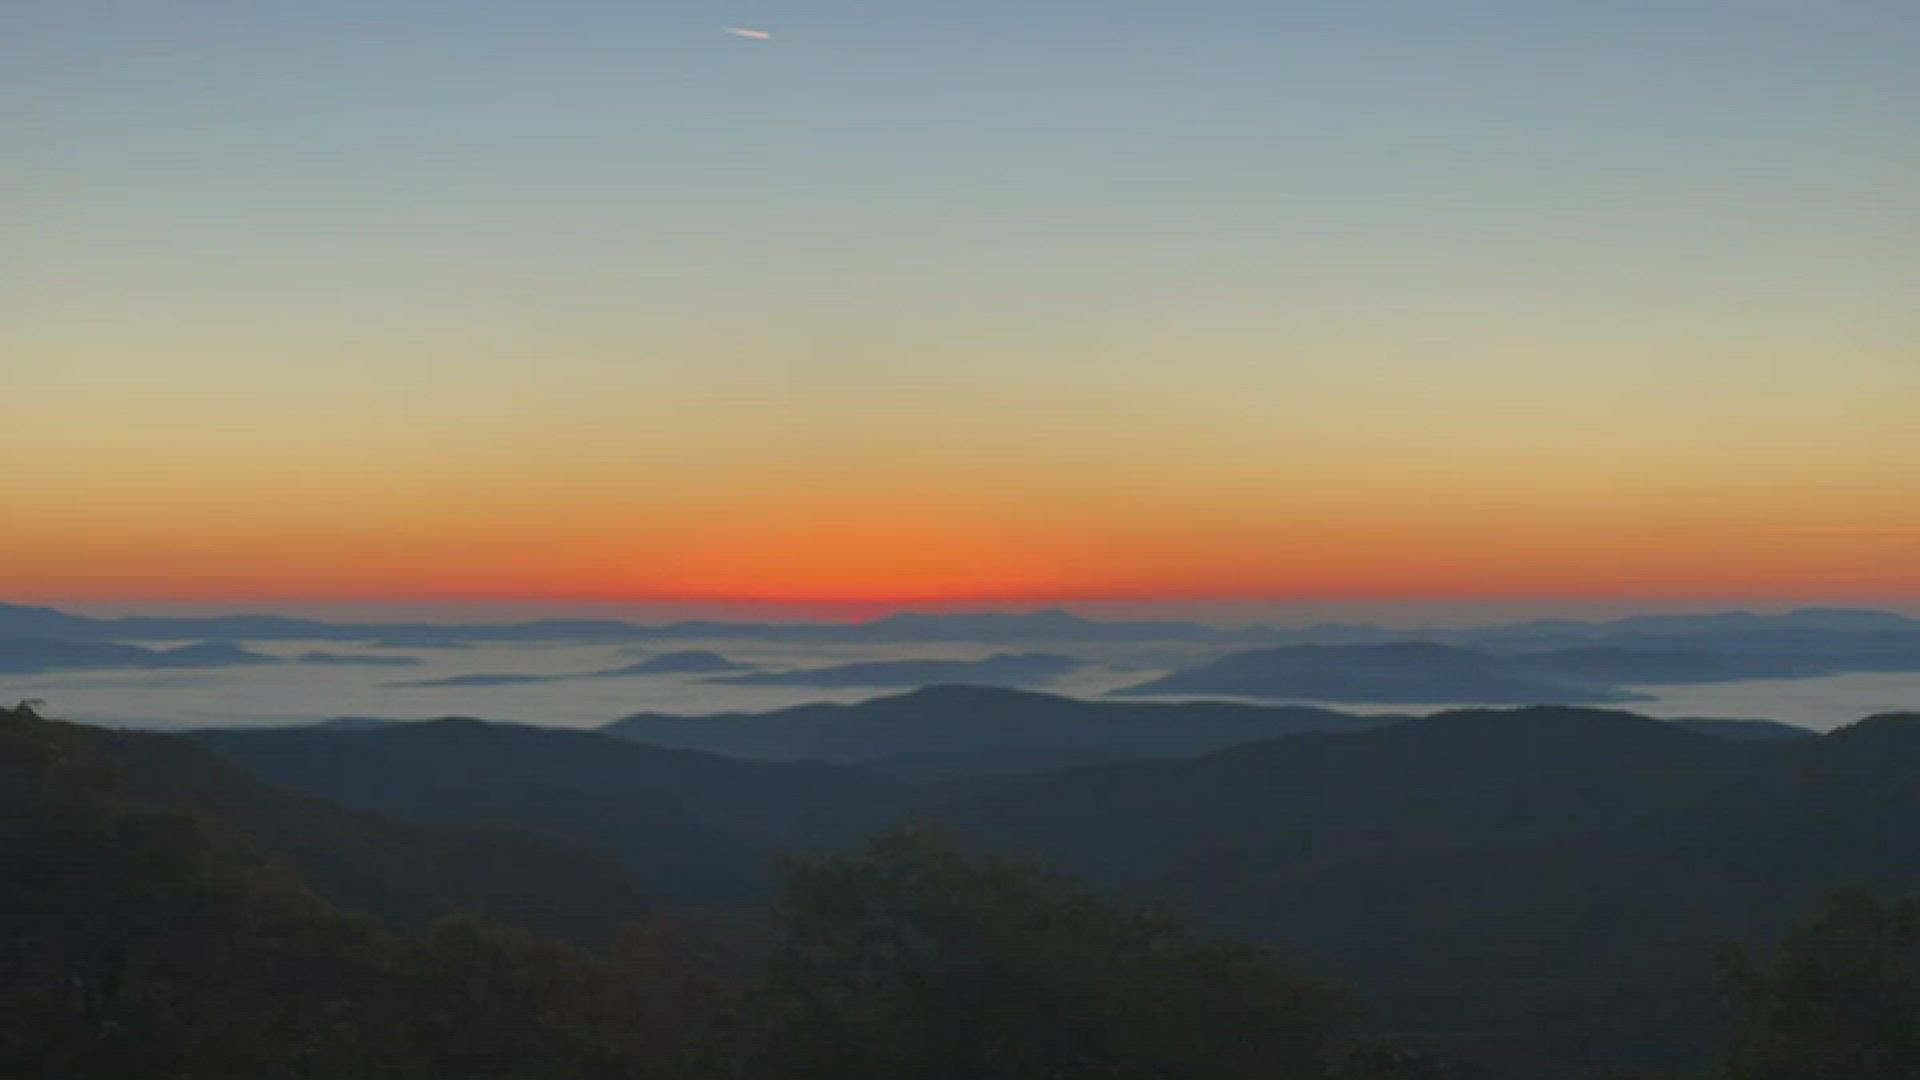 13News photographer Steve Rhodes created a 31-second time lapse of the sunrise at Blue Ridge Parkway.